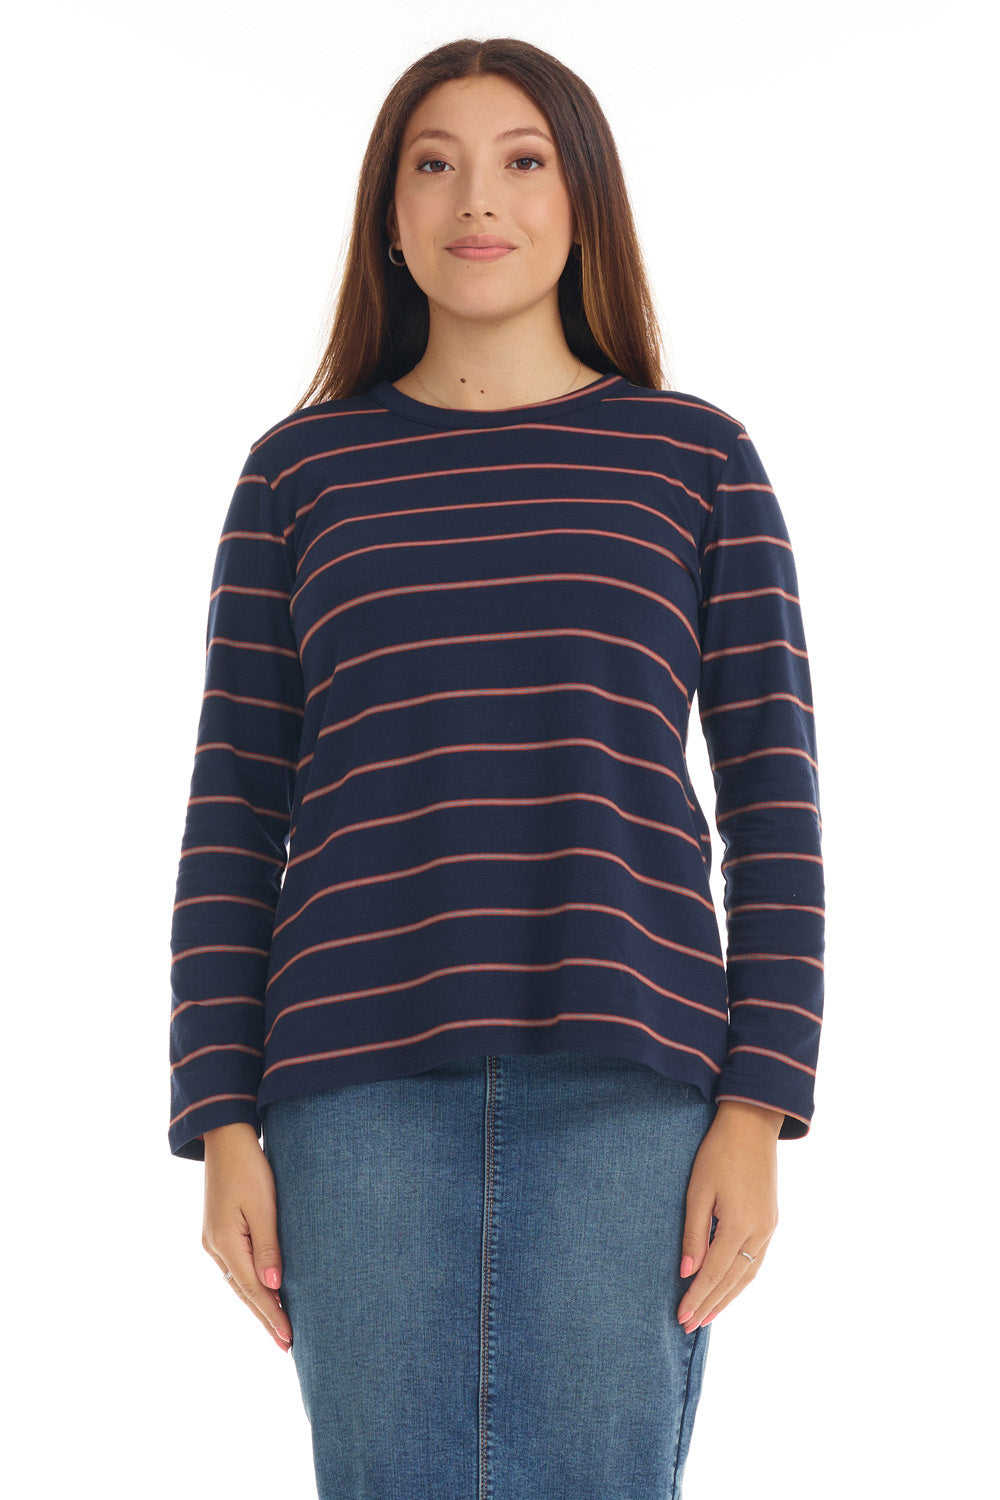 Navy and Orange Striped Long Sleeve Cotton T-shirt Top for Women 'B521'